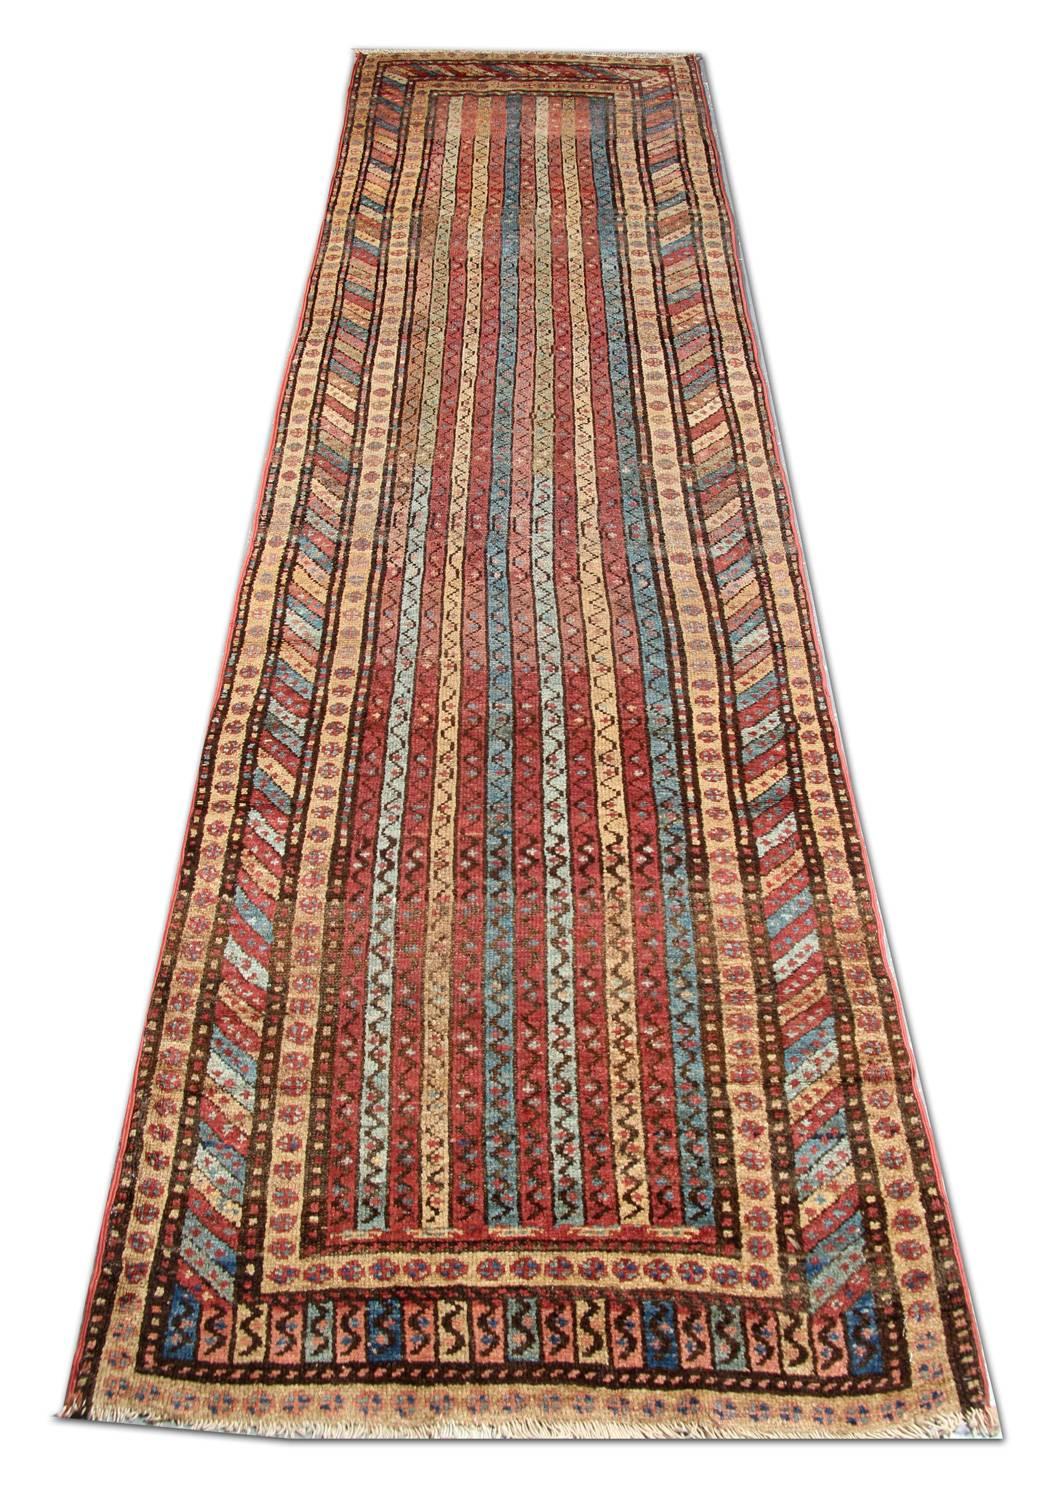 Handmade carpet oriental rug born out of nomadic traditional rugs, this antique striped rug from Shirvan features a spectacular array of modular stripes and classical border motifs that have a graphic linear in Rugs. The warm, earthy field is